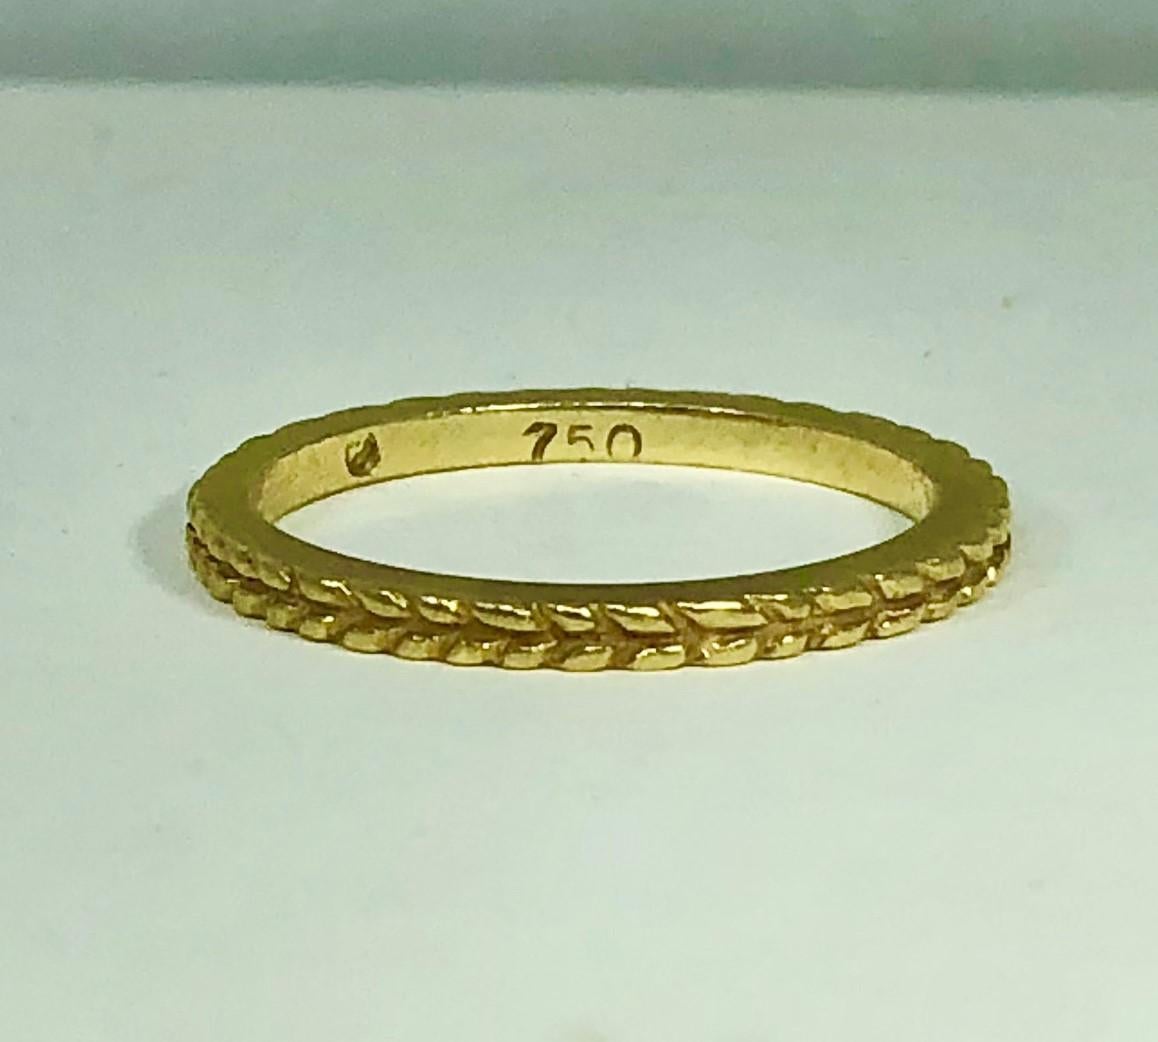 Hidalgo 18 karat yellow gold wheat pattern stackable band. Beautiful Hidalgo classic created in 18 karat yellow gold with a knotted wheat pattern texture. This band weighs 2.6 grams, 1.6 mm tall and 2 mm wide. Finger size 6 1/2. This piece can be